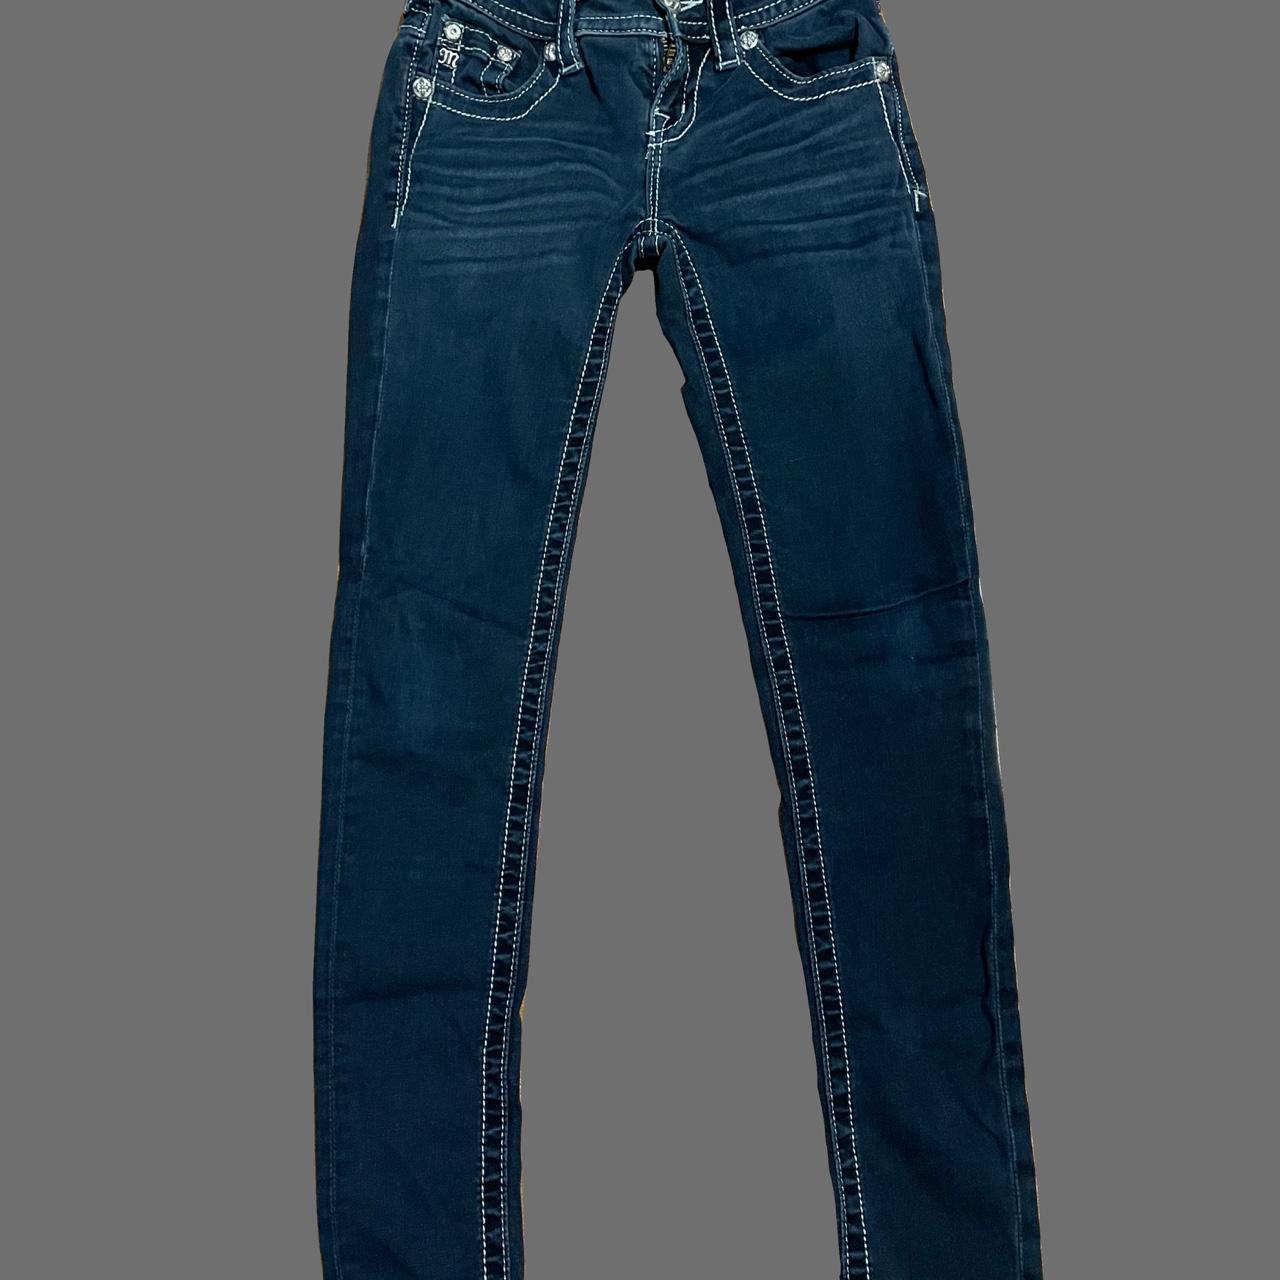 Jeans For Women: Skinny & Bootcut Jeans | Miss Me